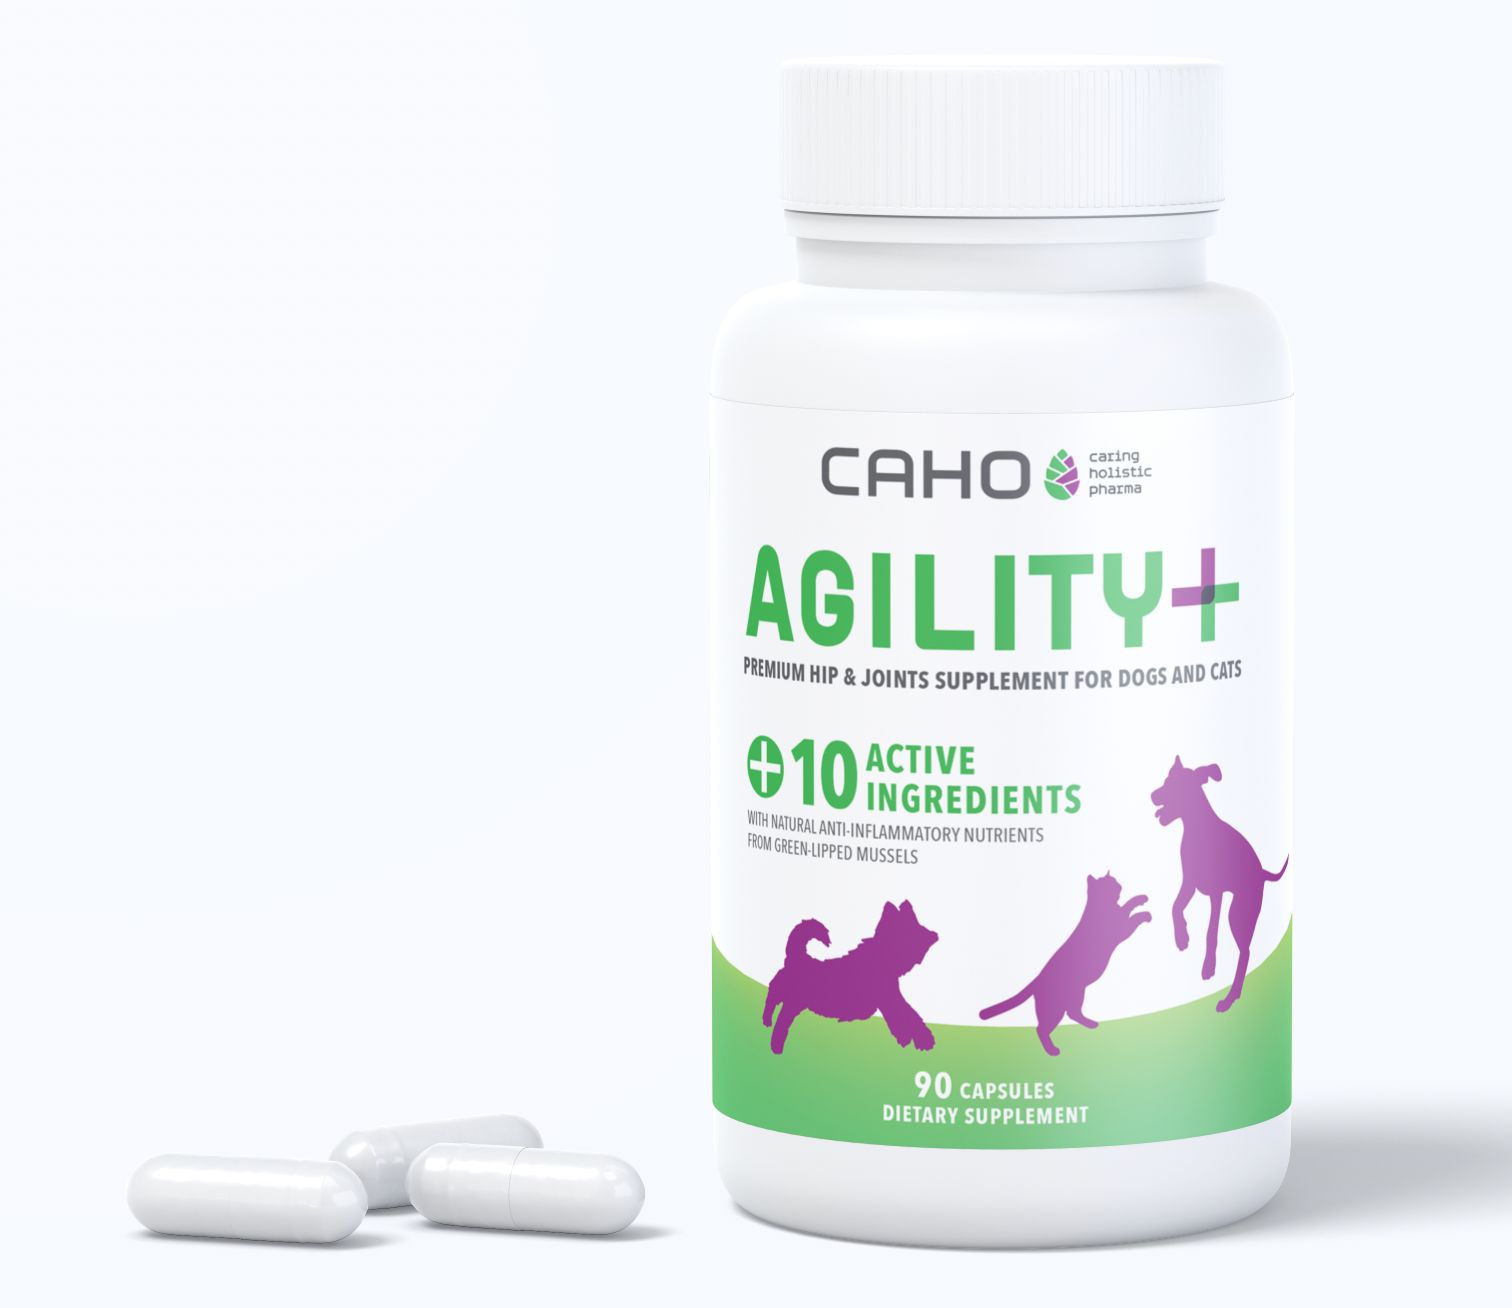 CAHO AGILITY+ premium hip and joints supplements for dogs and cats (90 capsules)